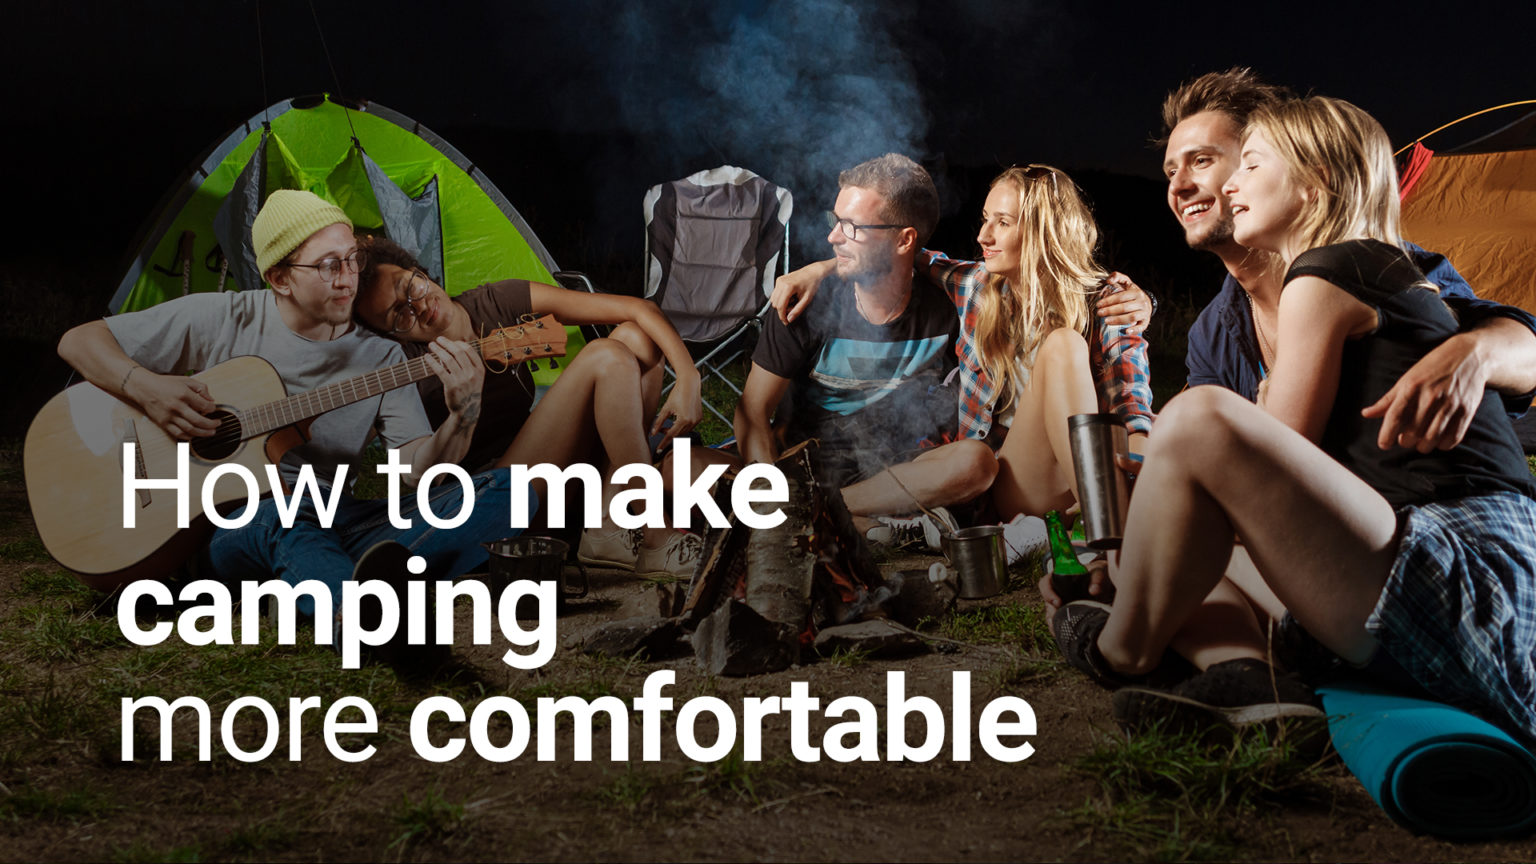 How To Make Camping More Comfortable